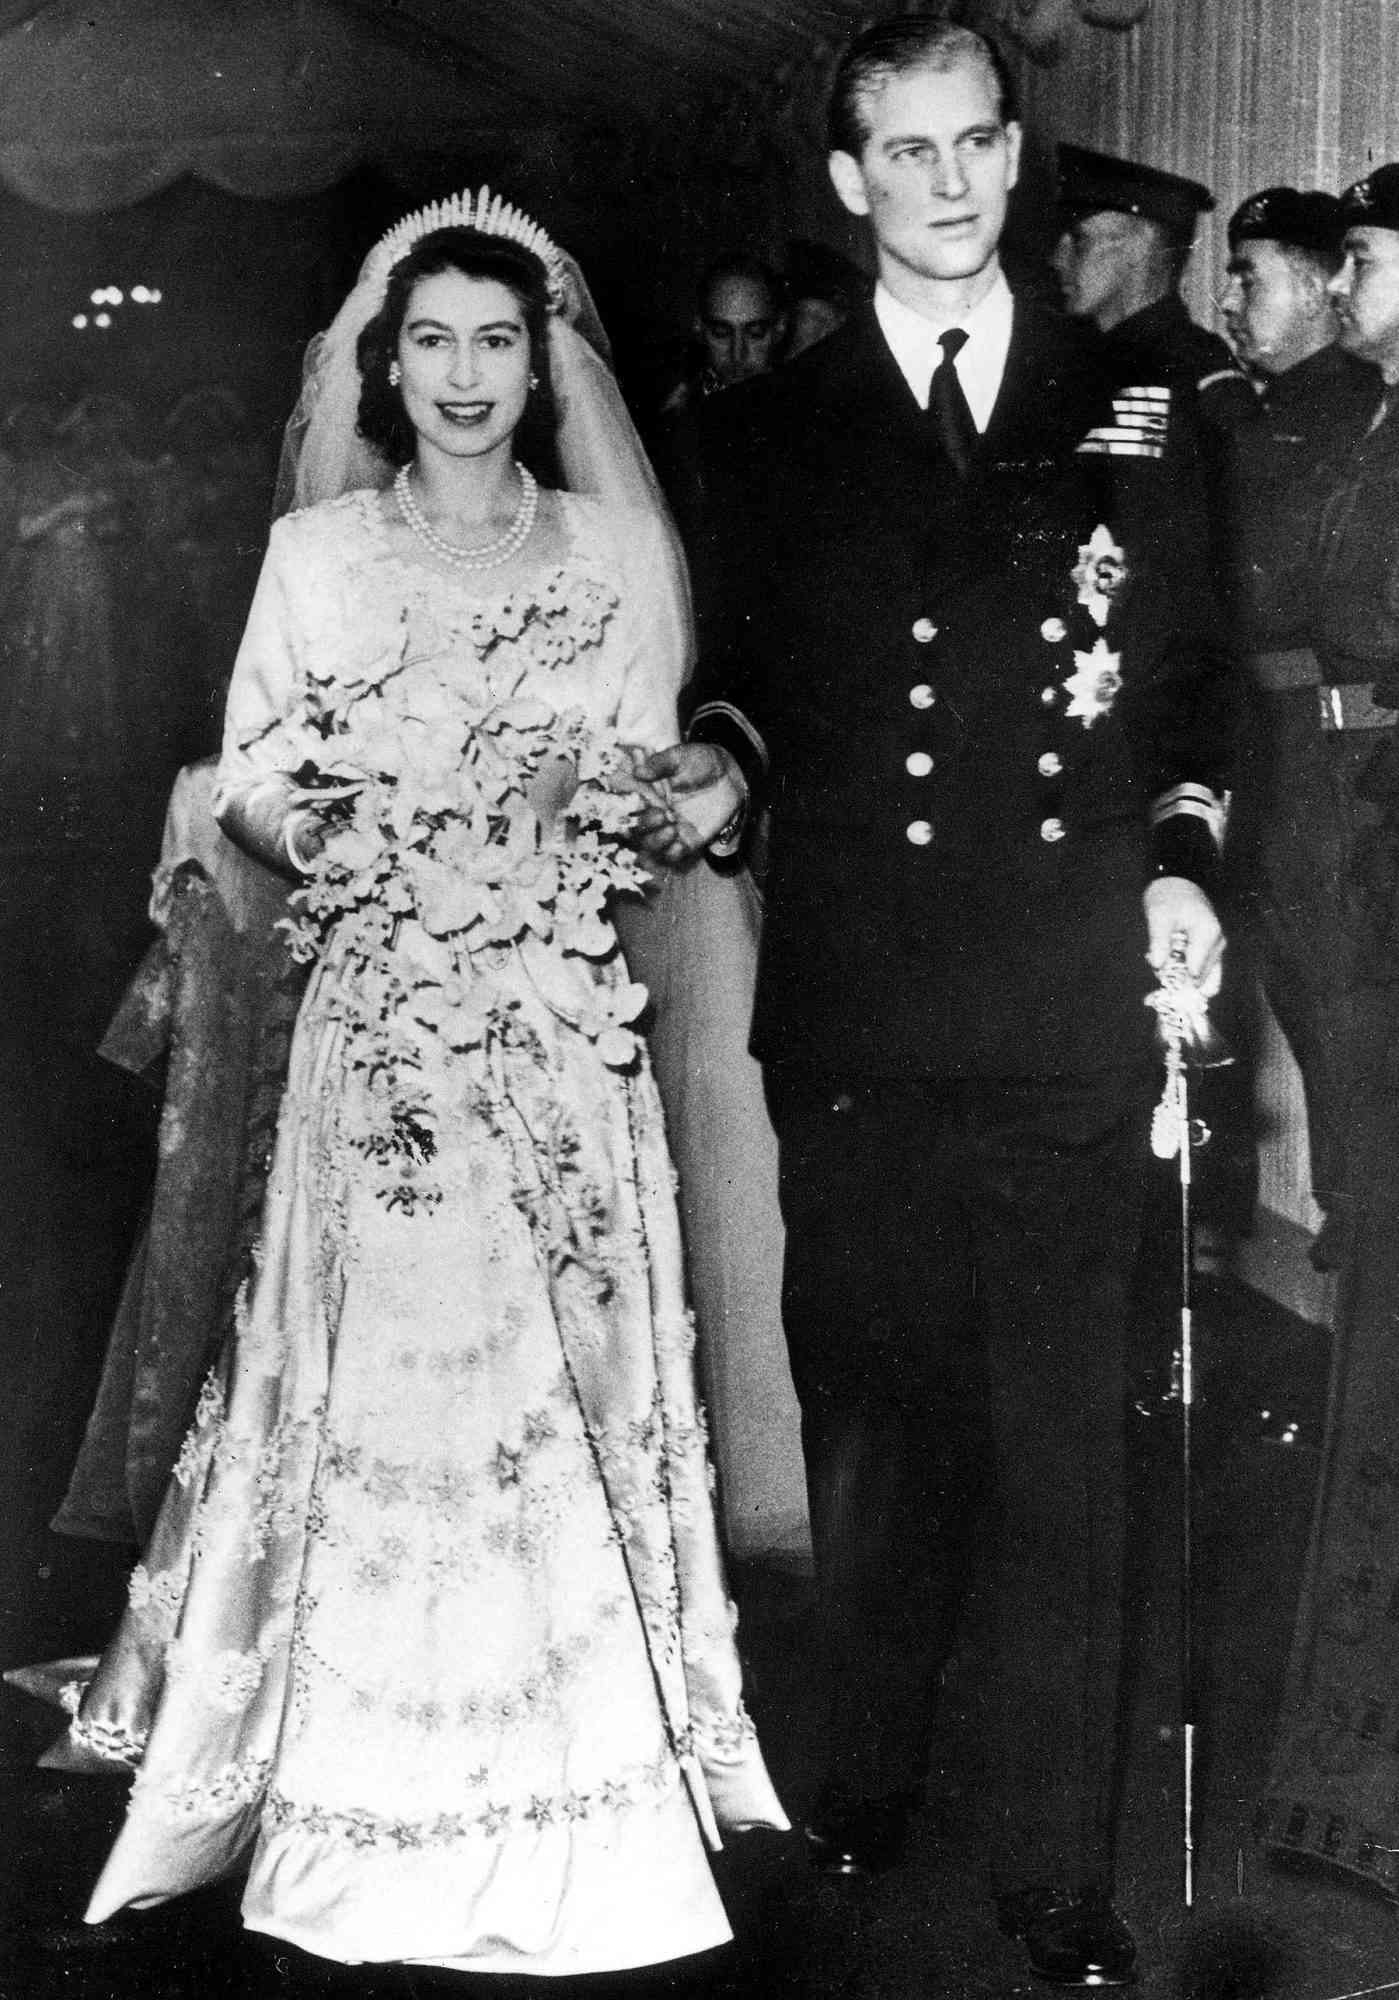 London, England. 20th November, 1947. Princess Elizabeth (later Queen Elizabeth II) and Philip Mountbatten pictured leaving Westminster Abbey after their wedding ceremony.